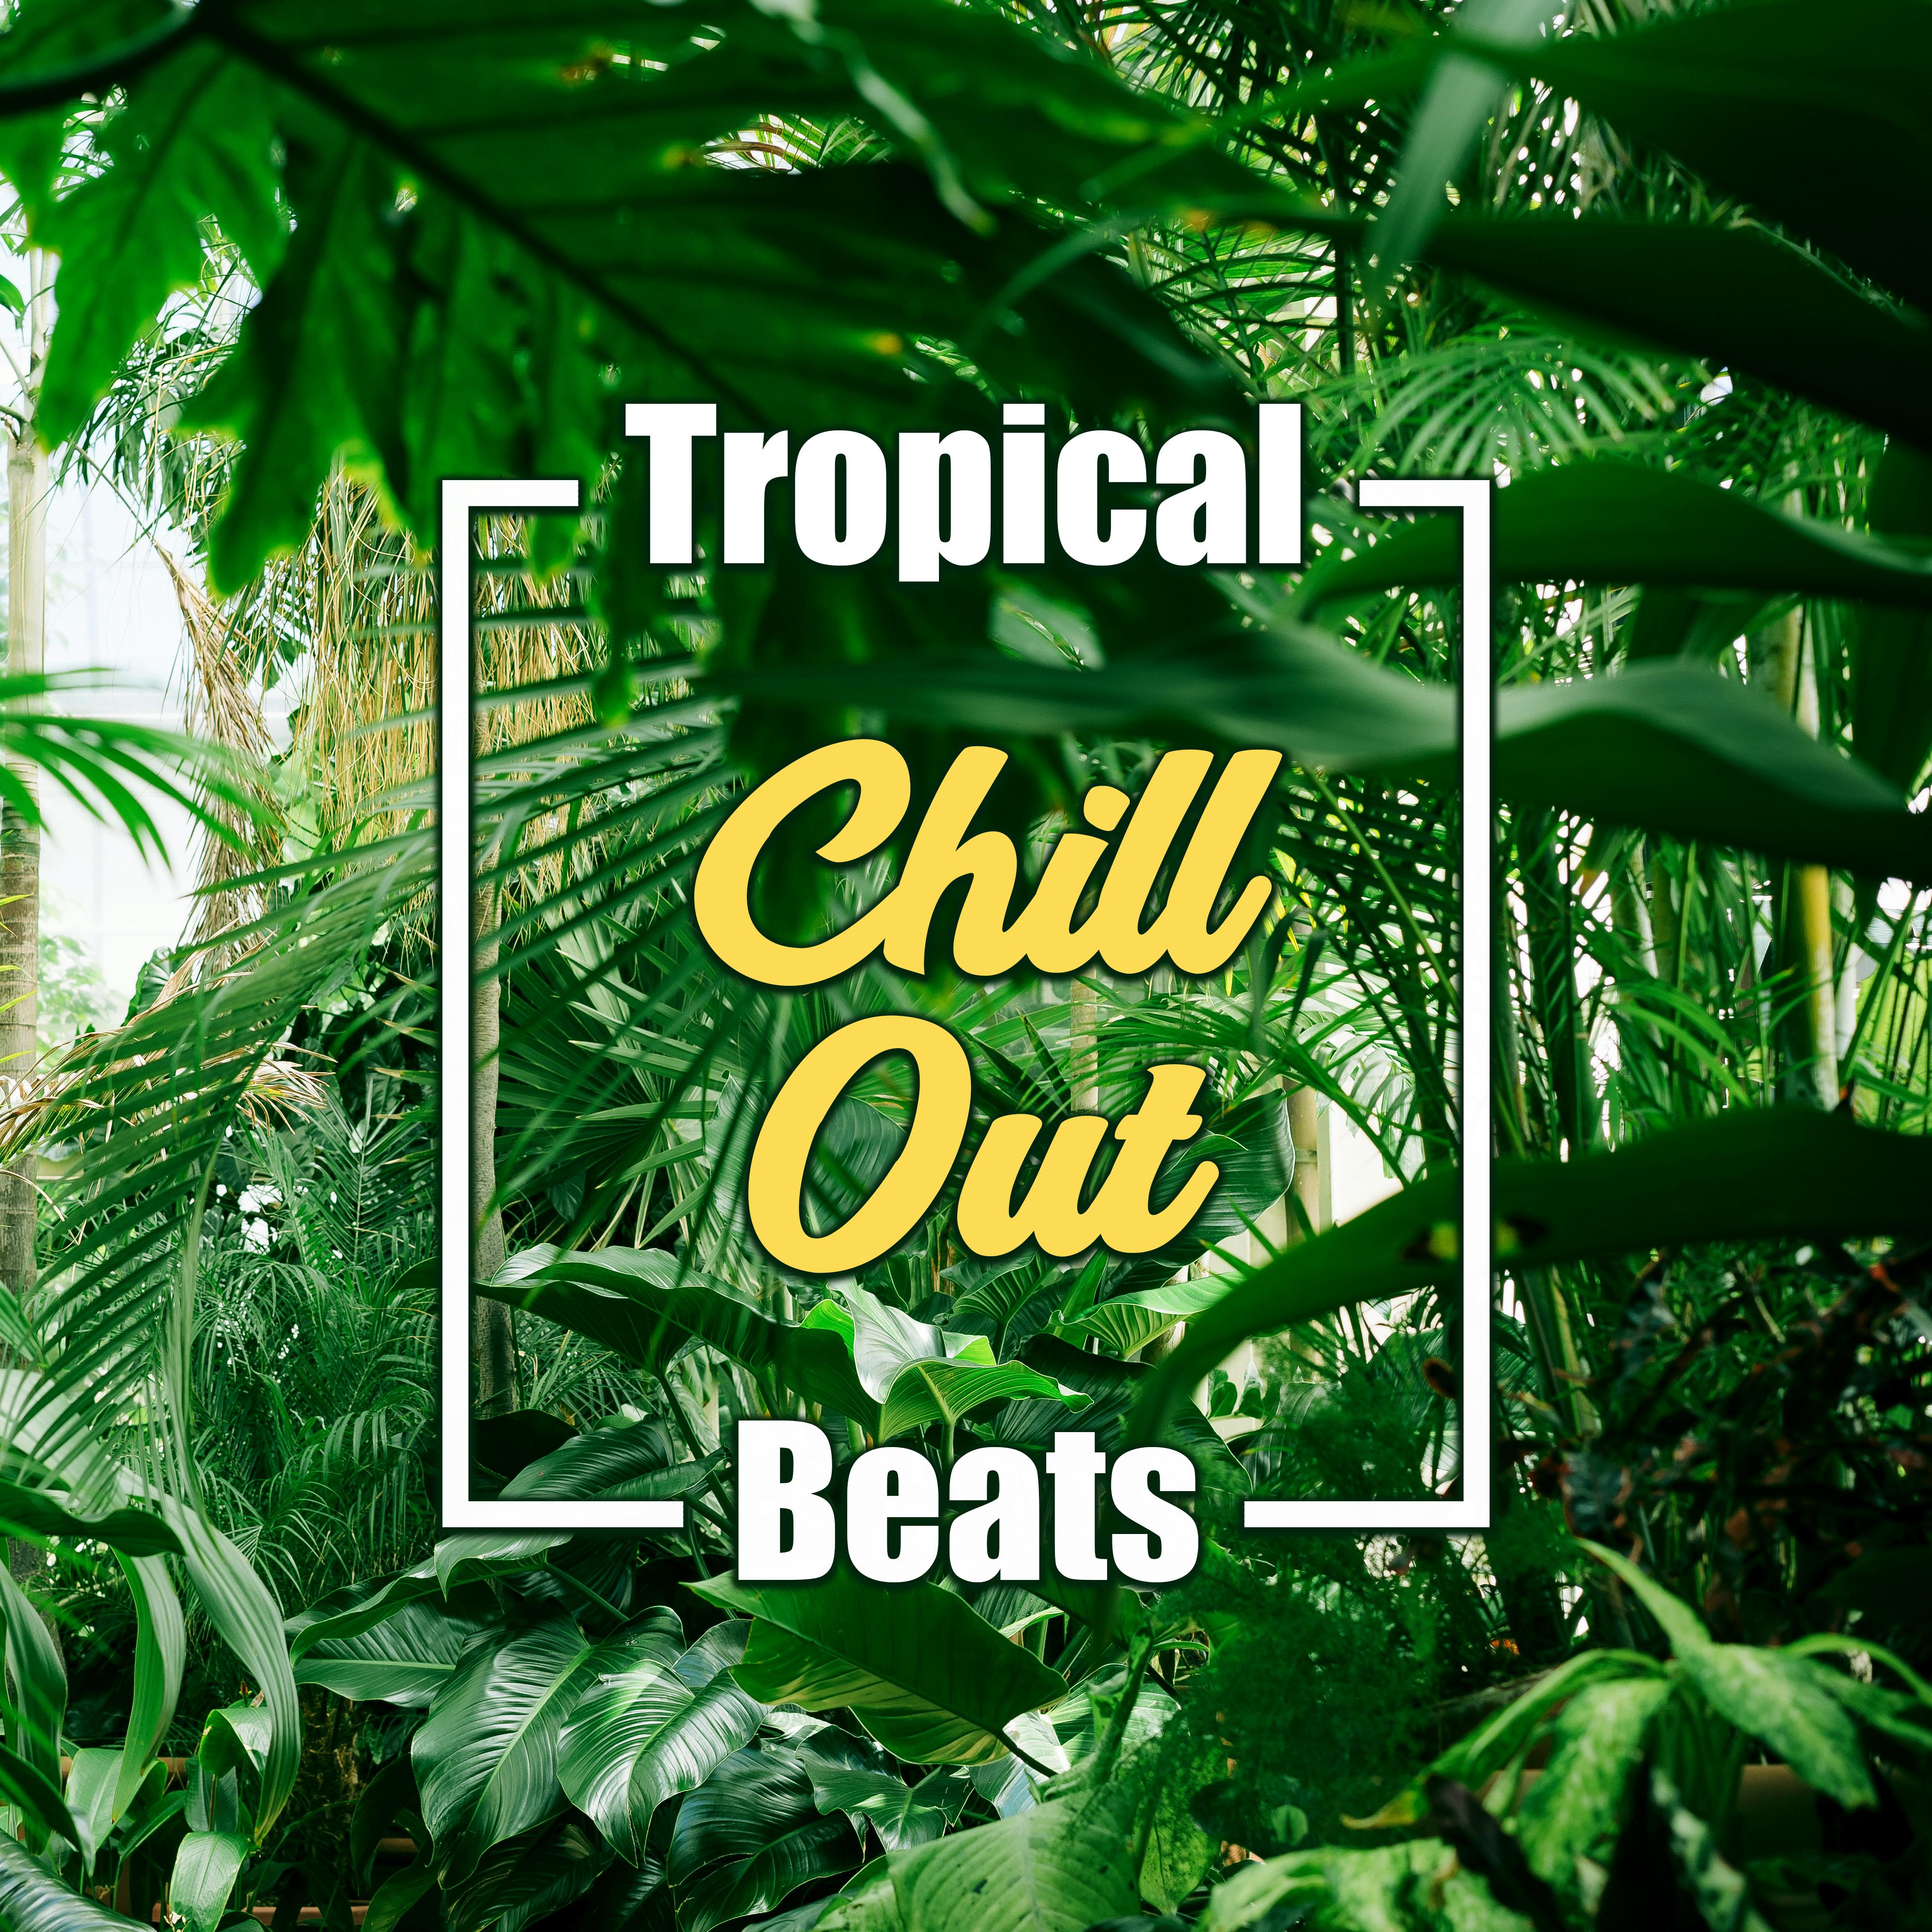 Tropical Chill Out Beats  Summer Rest, Chill Out 2017, Holiday Music, Beach Relaxation, Sunrise Songs